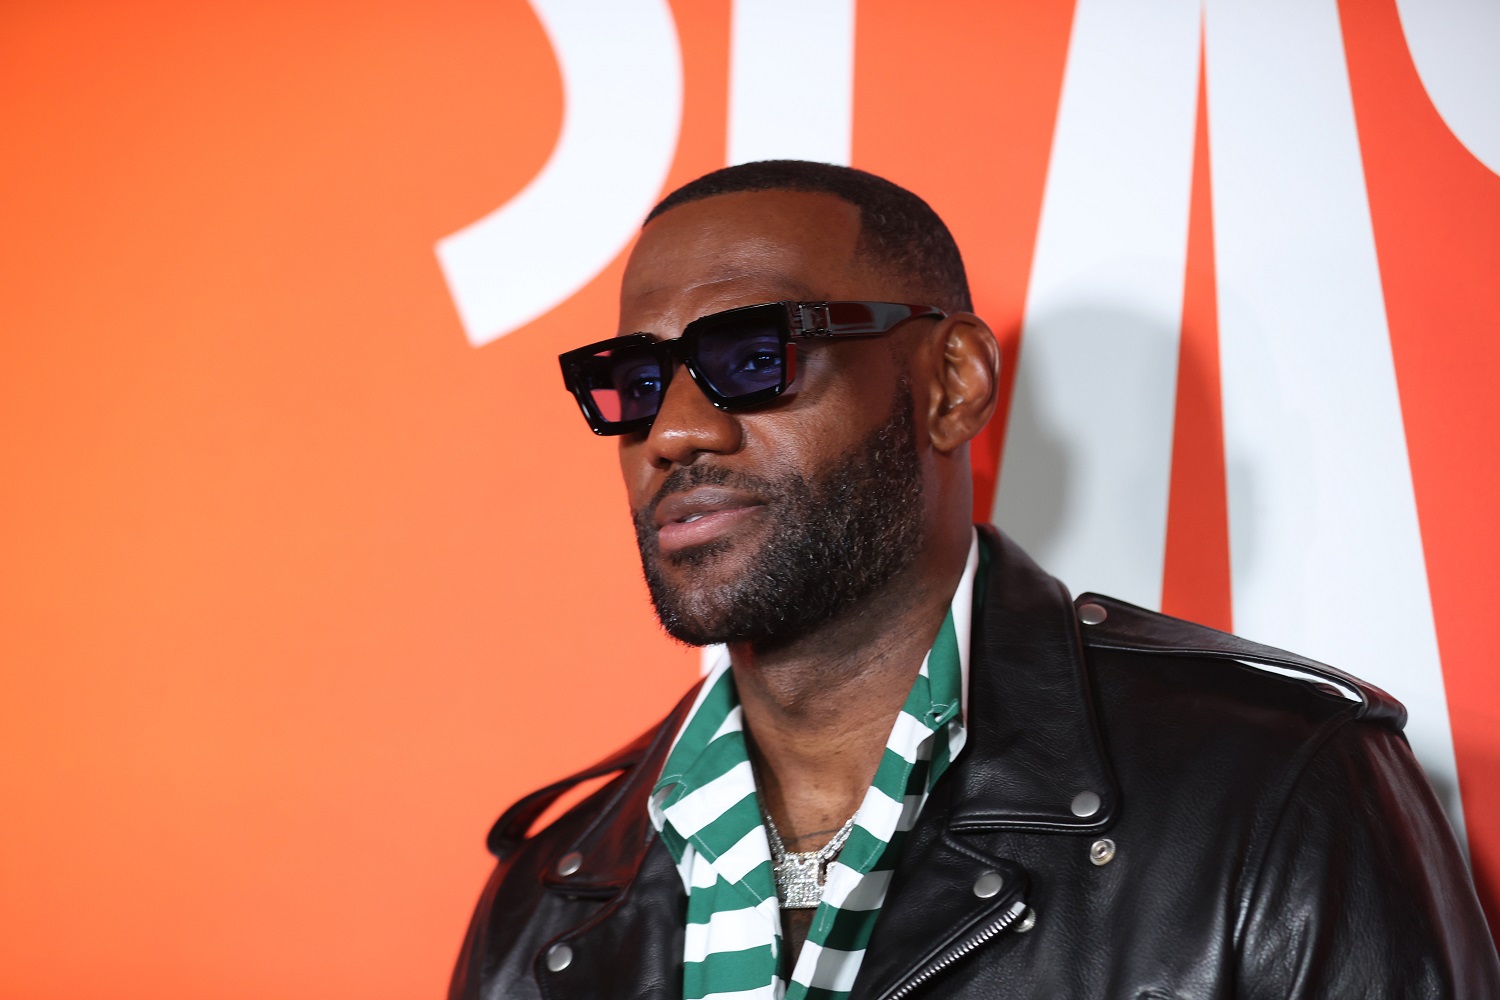 LeBron James attends the 'Space Jam: A New Legacy' Party at Six Flags Magic Mountain on June 29, 2021, in Valencia, California.